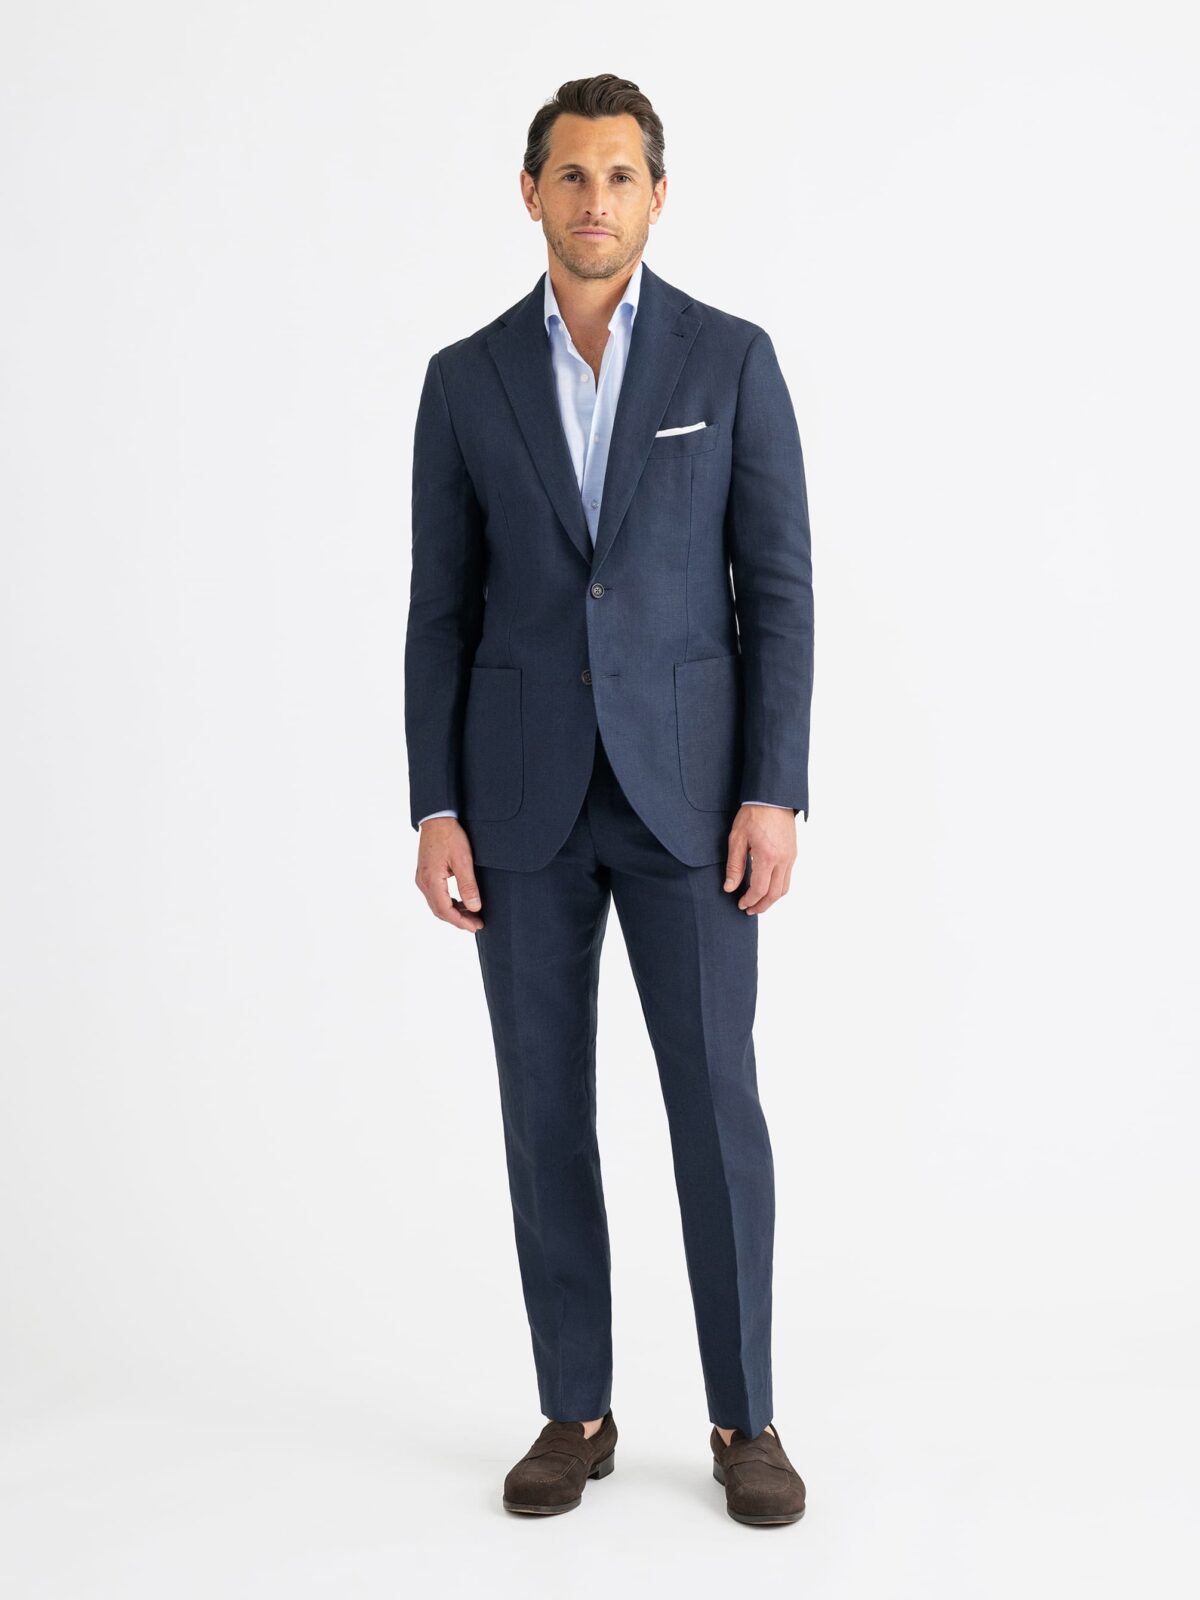 Which Are The Best Suit Materials To Use? - My Suit Tailor